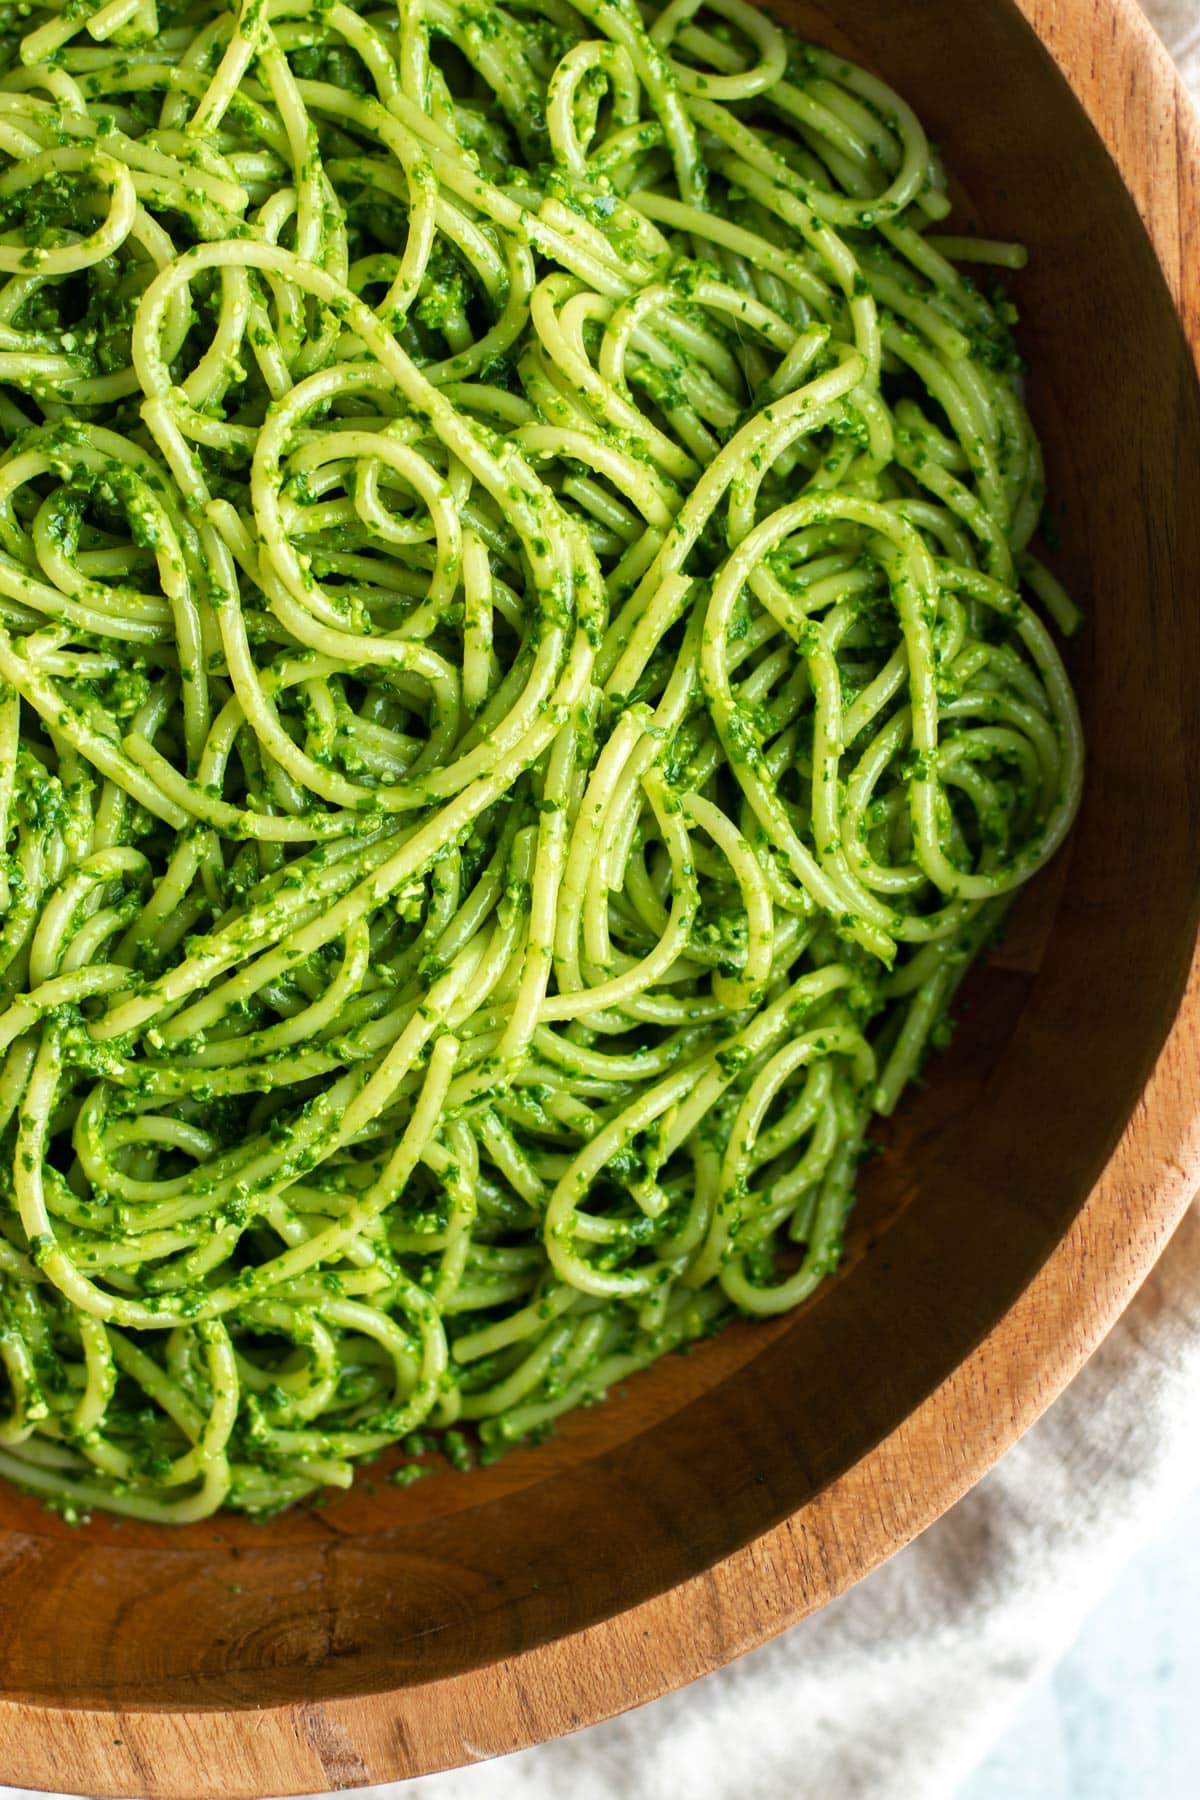 pasta tossed with pesto in a wooden bowl.